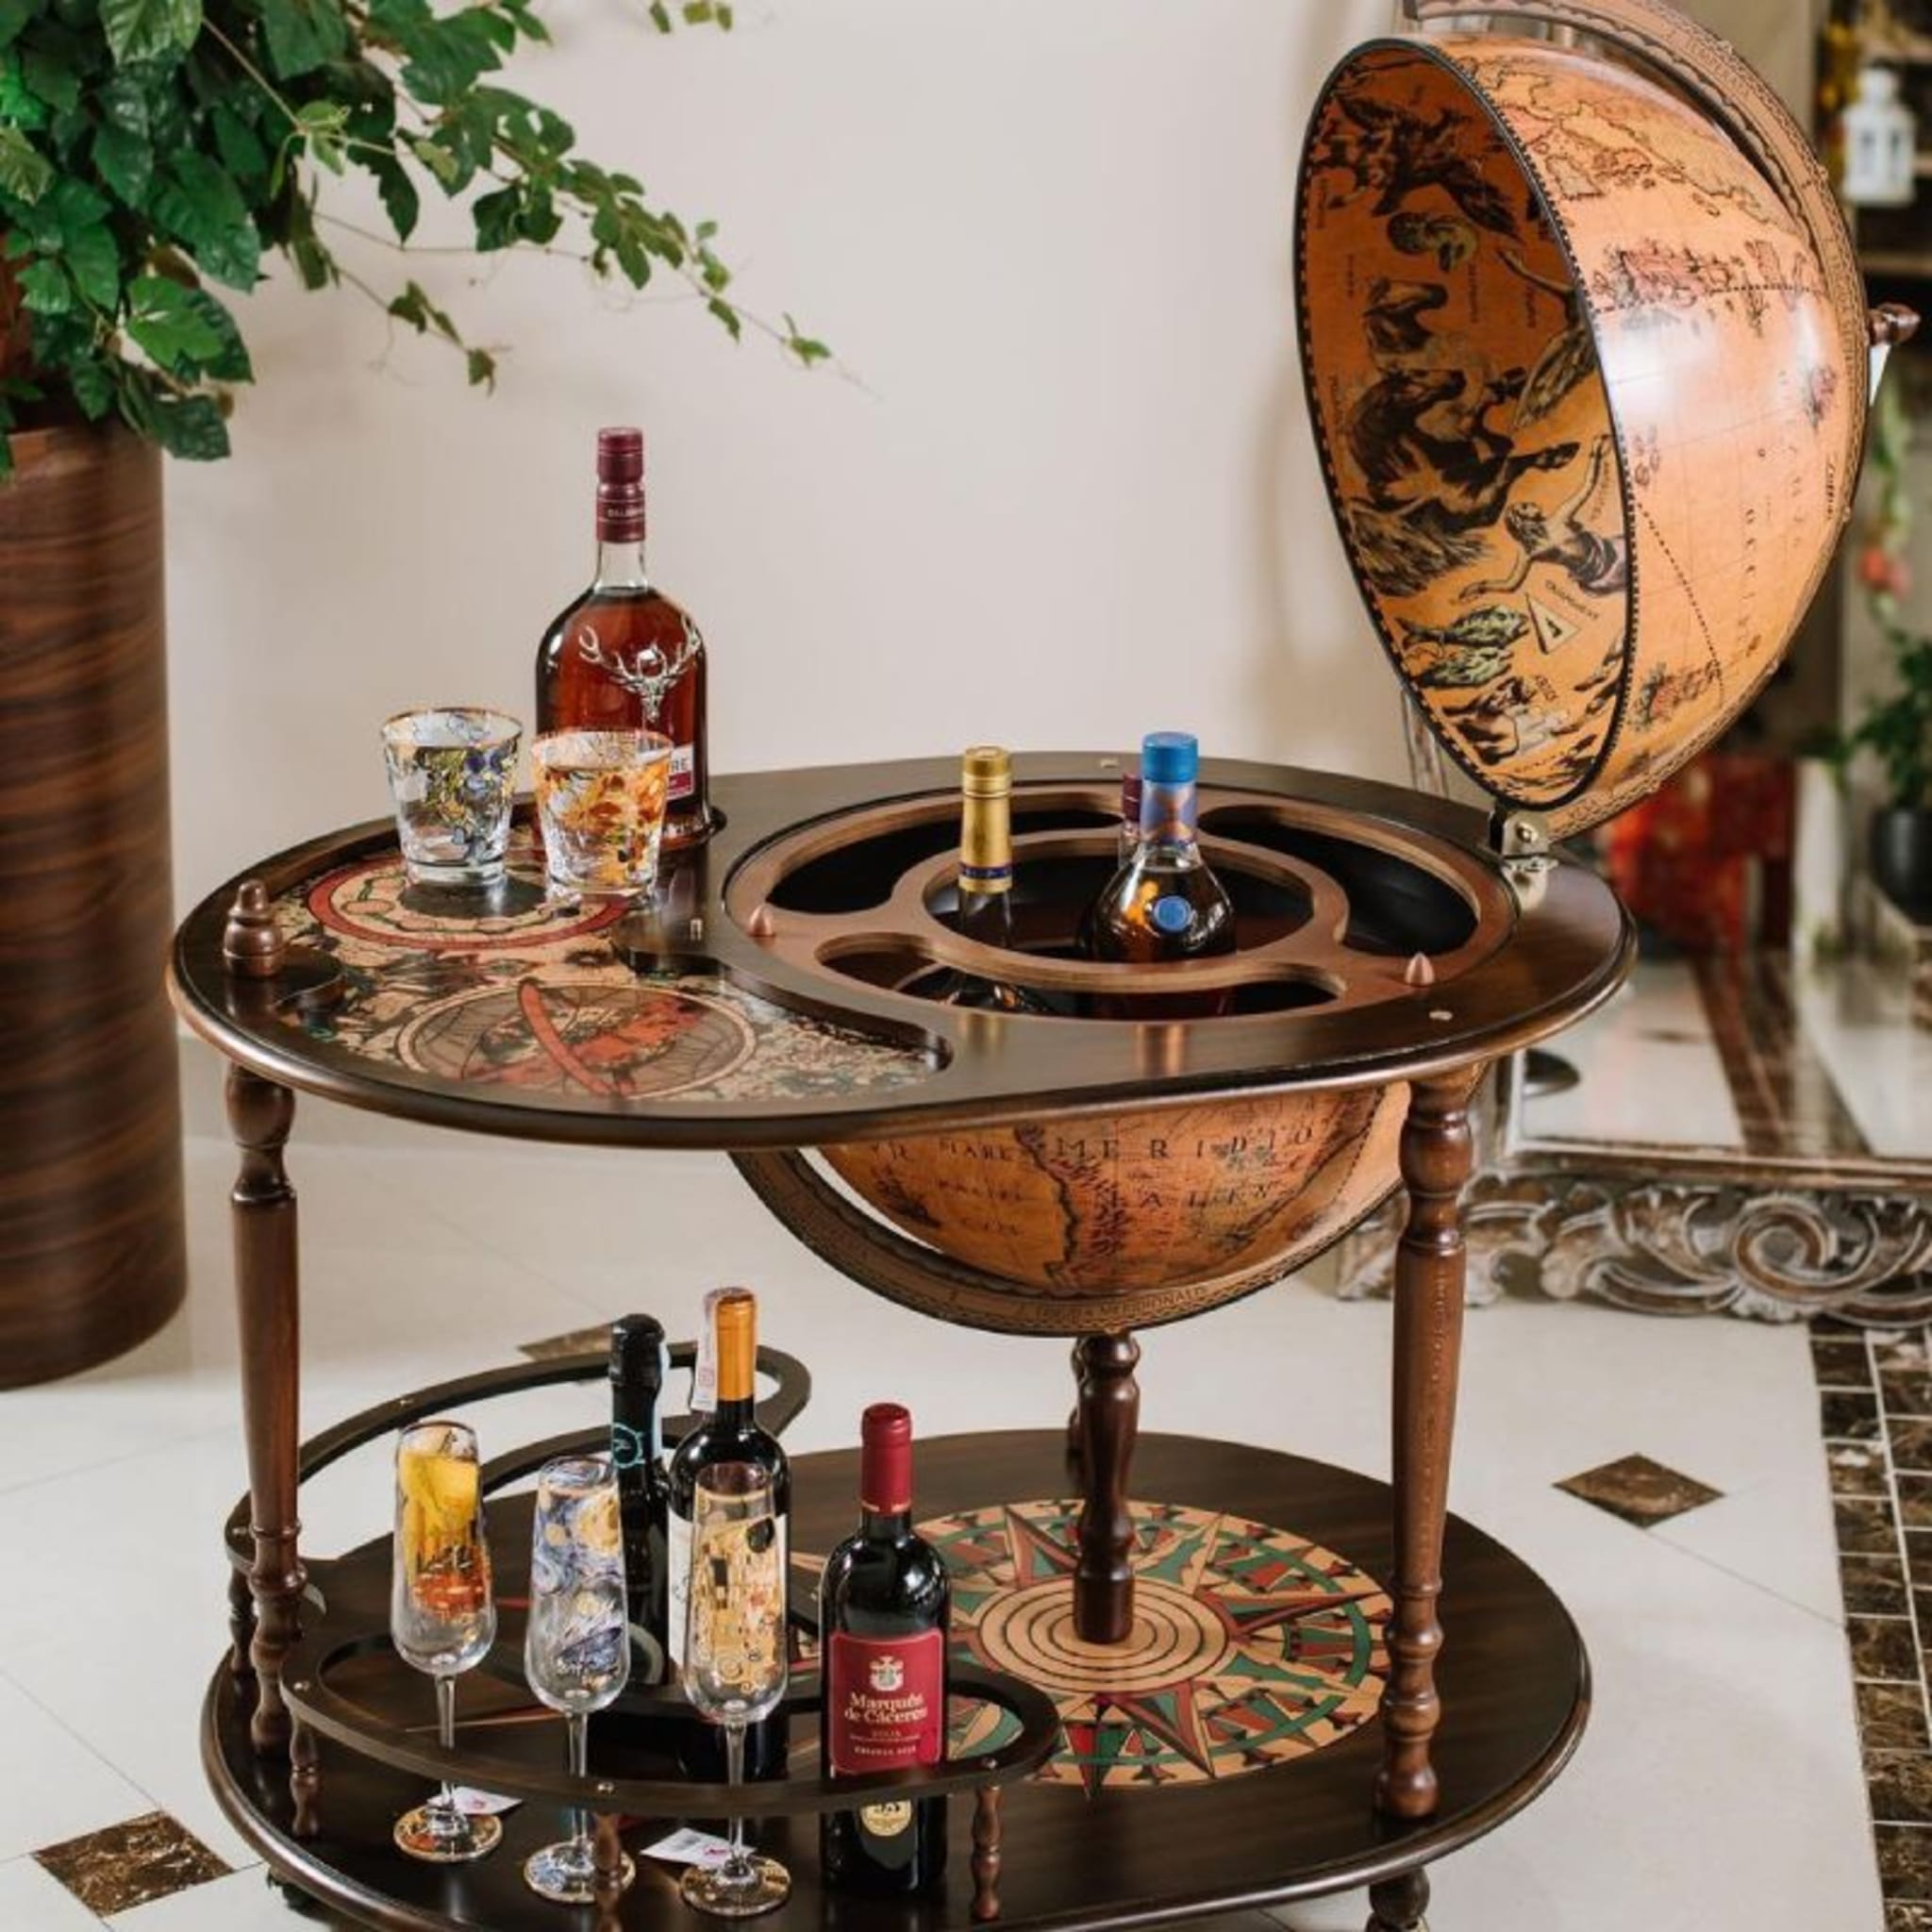 Add a touch of elegance to your home with this beautiful Sophistication Globe Bar.